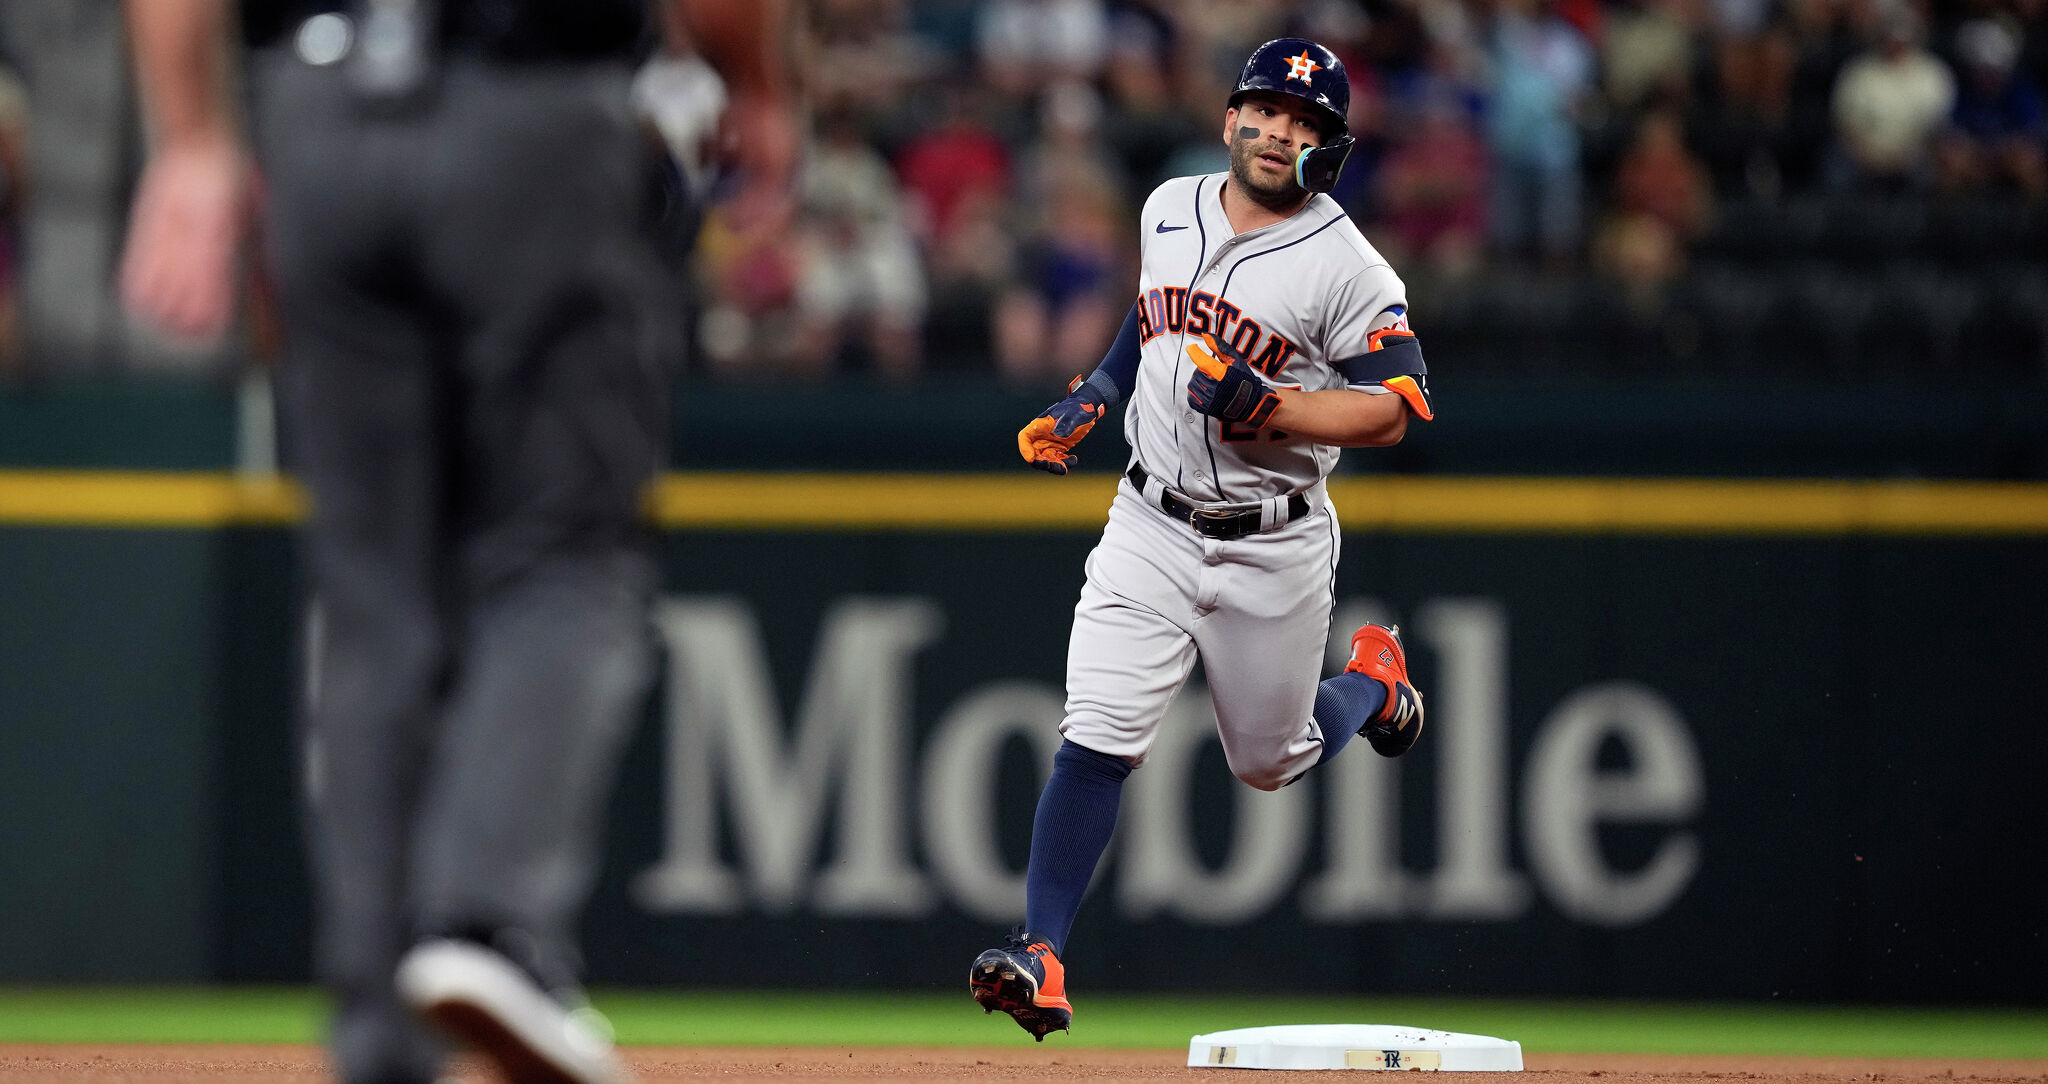 Houston Astros defeat Texas Rangers in playofflike atmosphere